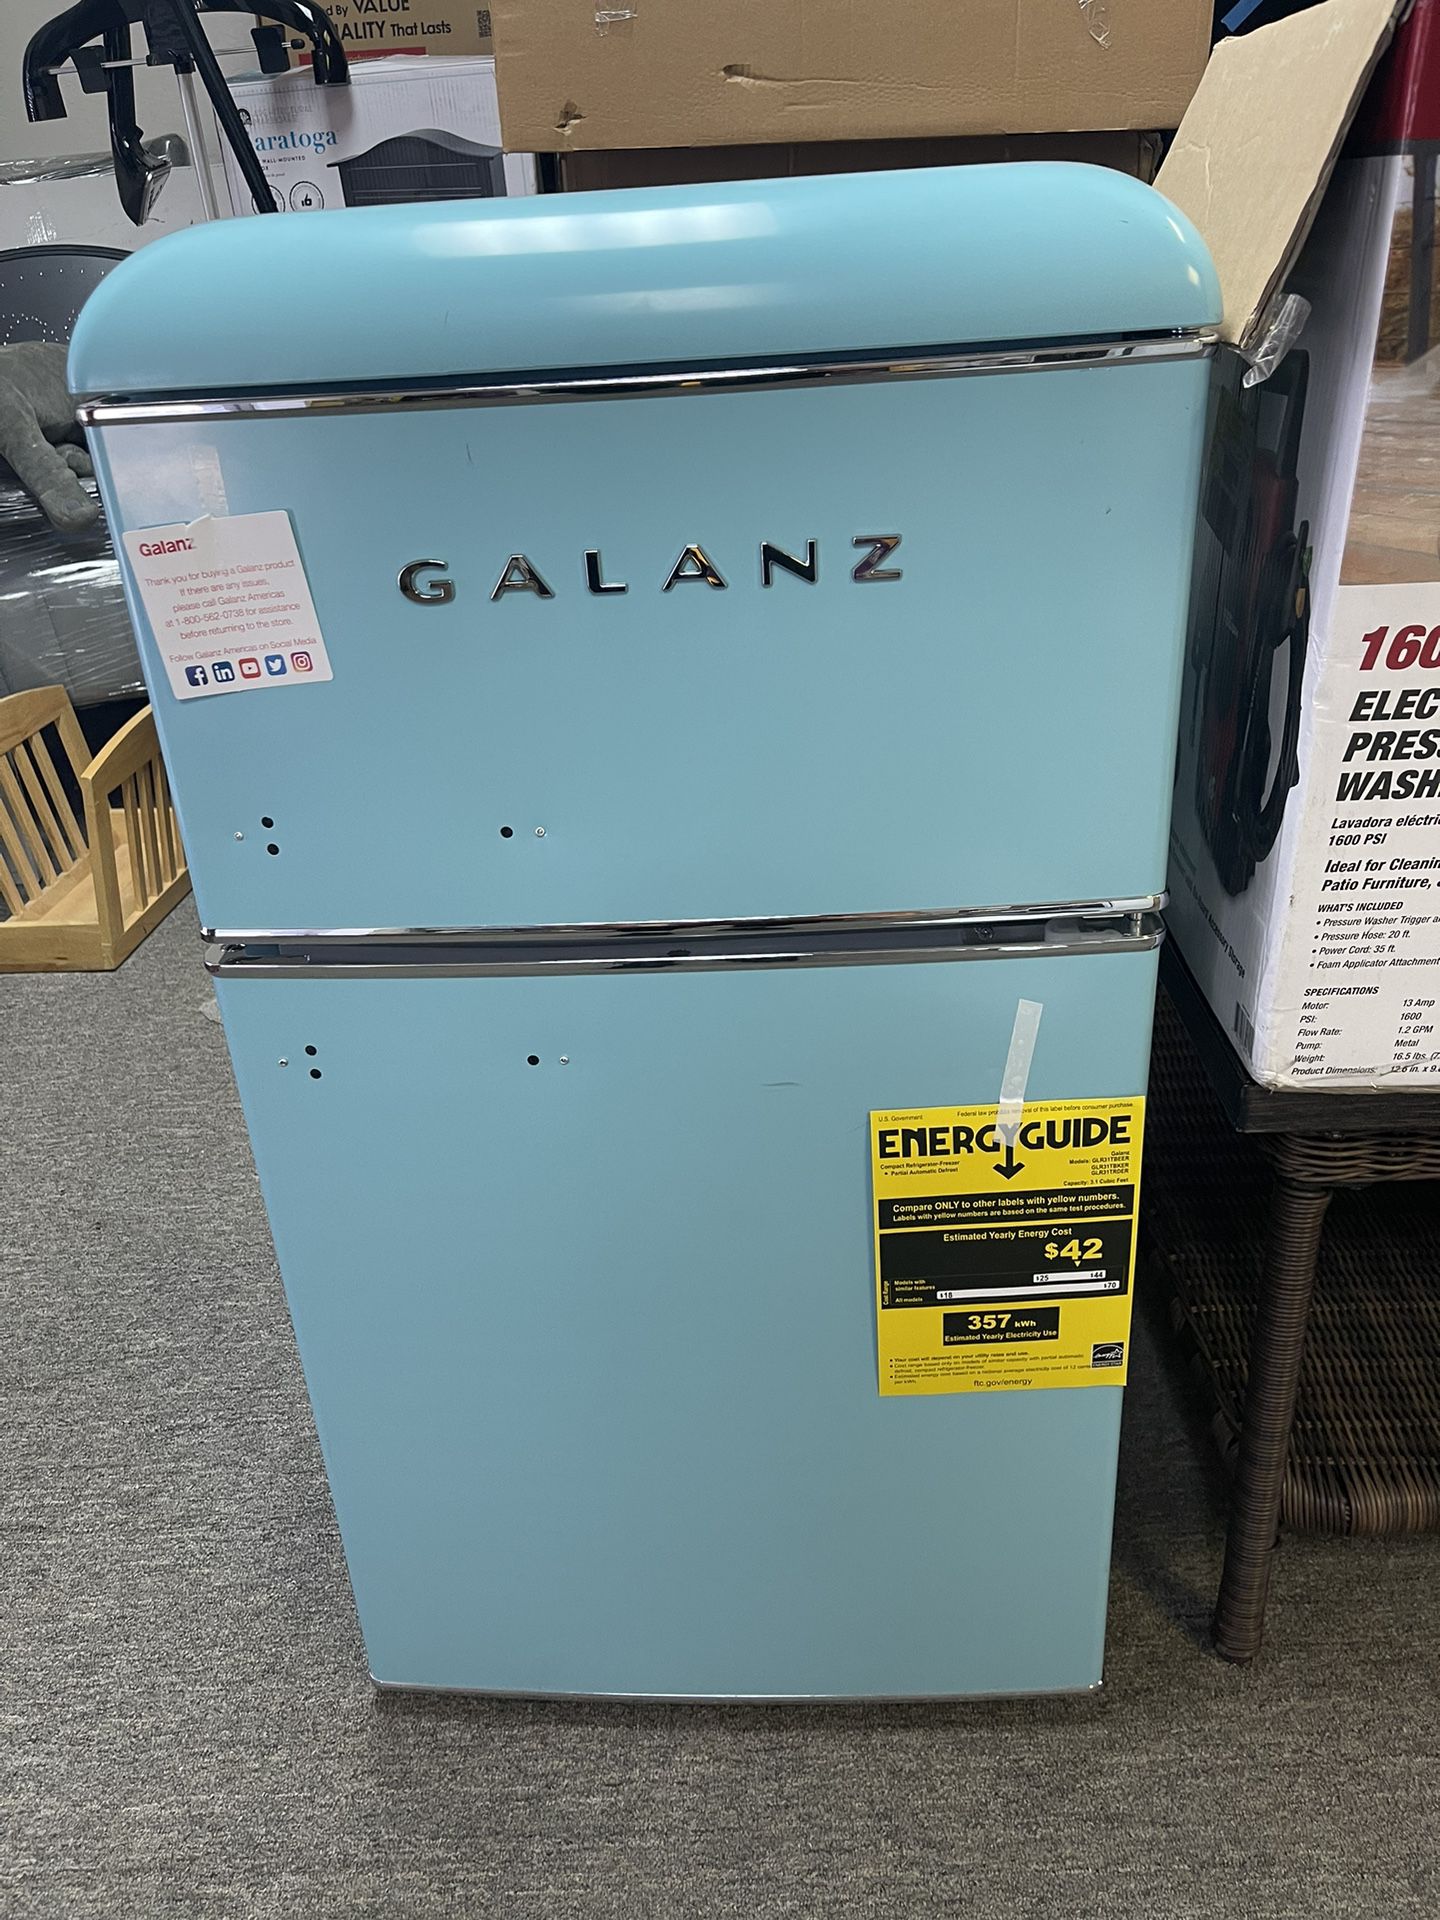 2022 Retro Teal Two- Door Mini Fridge (Almost New) for Sale in New York, NY  - OfferUp